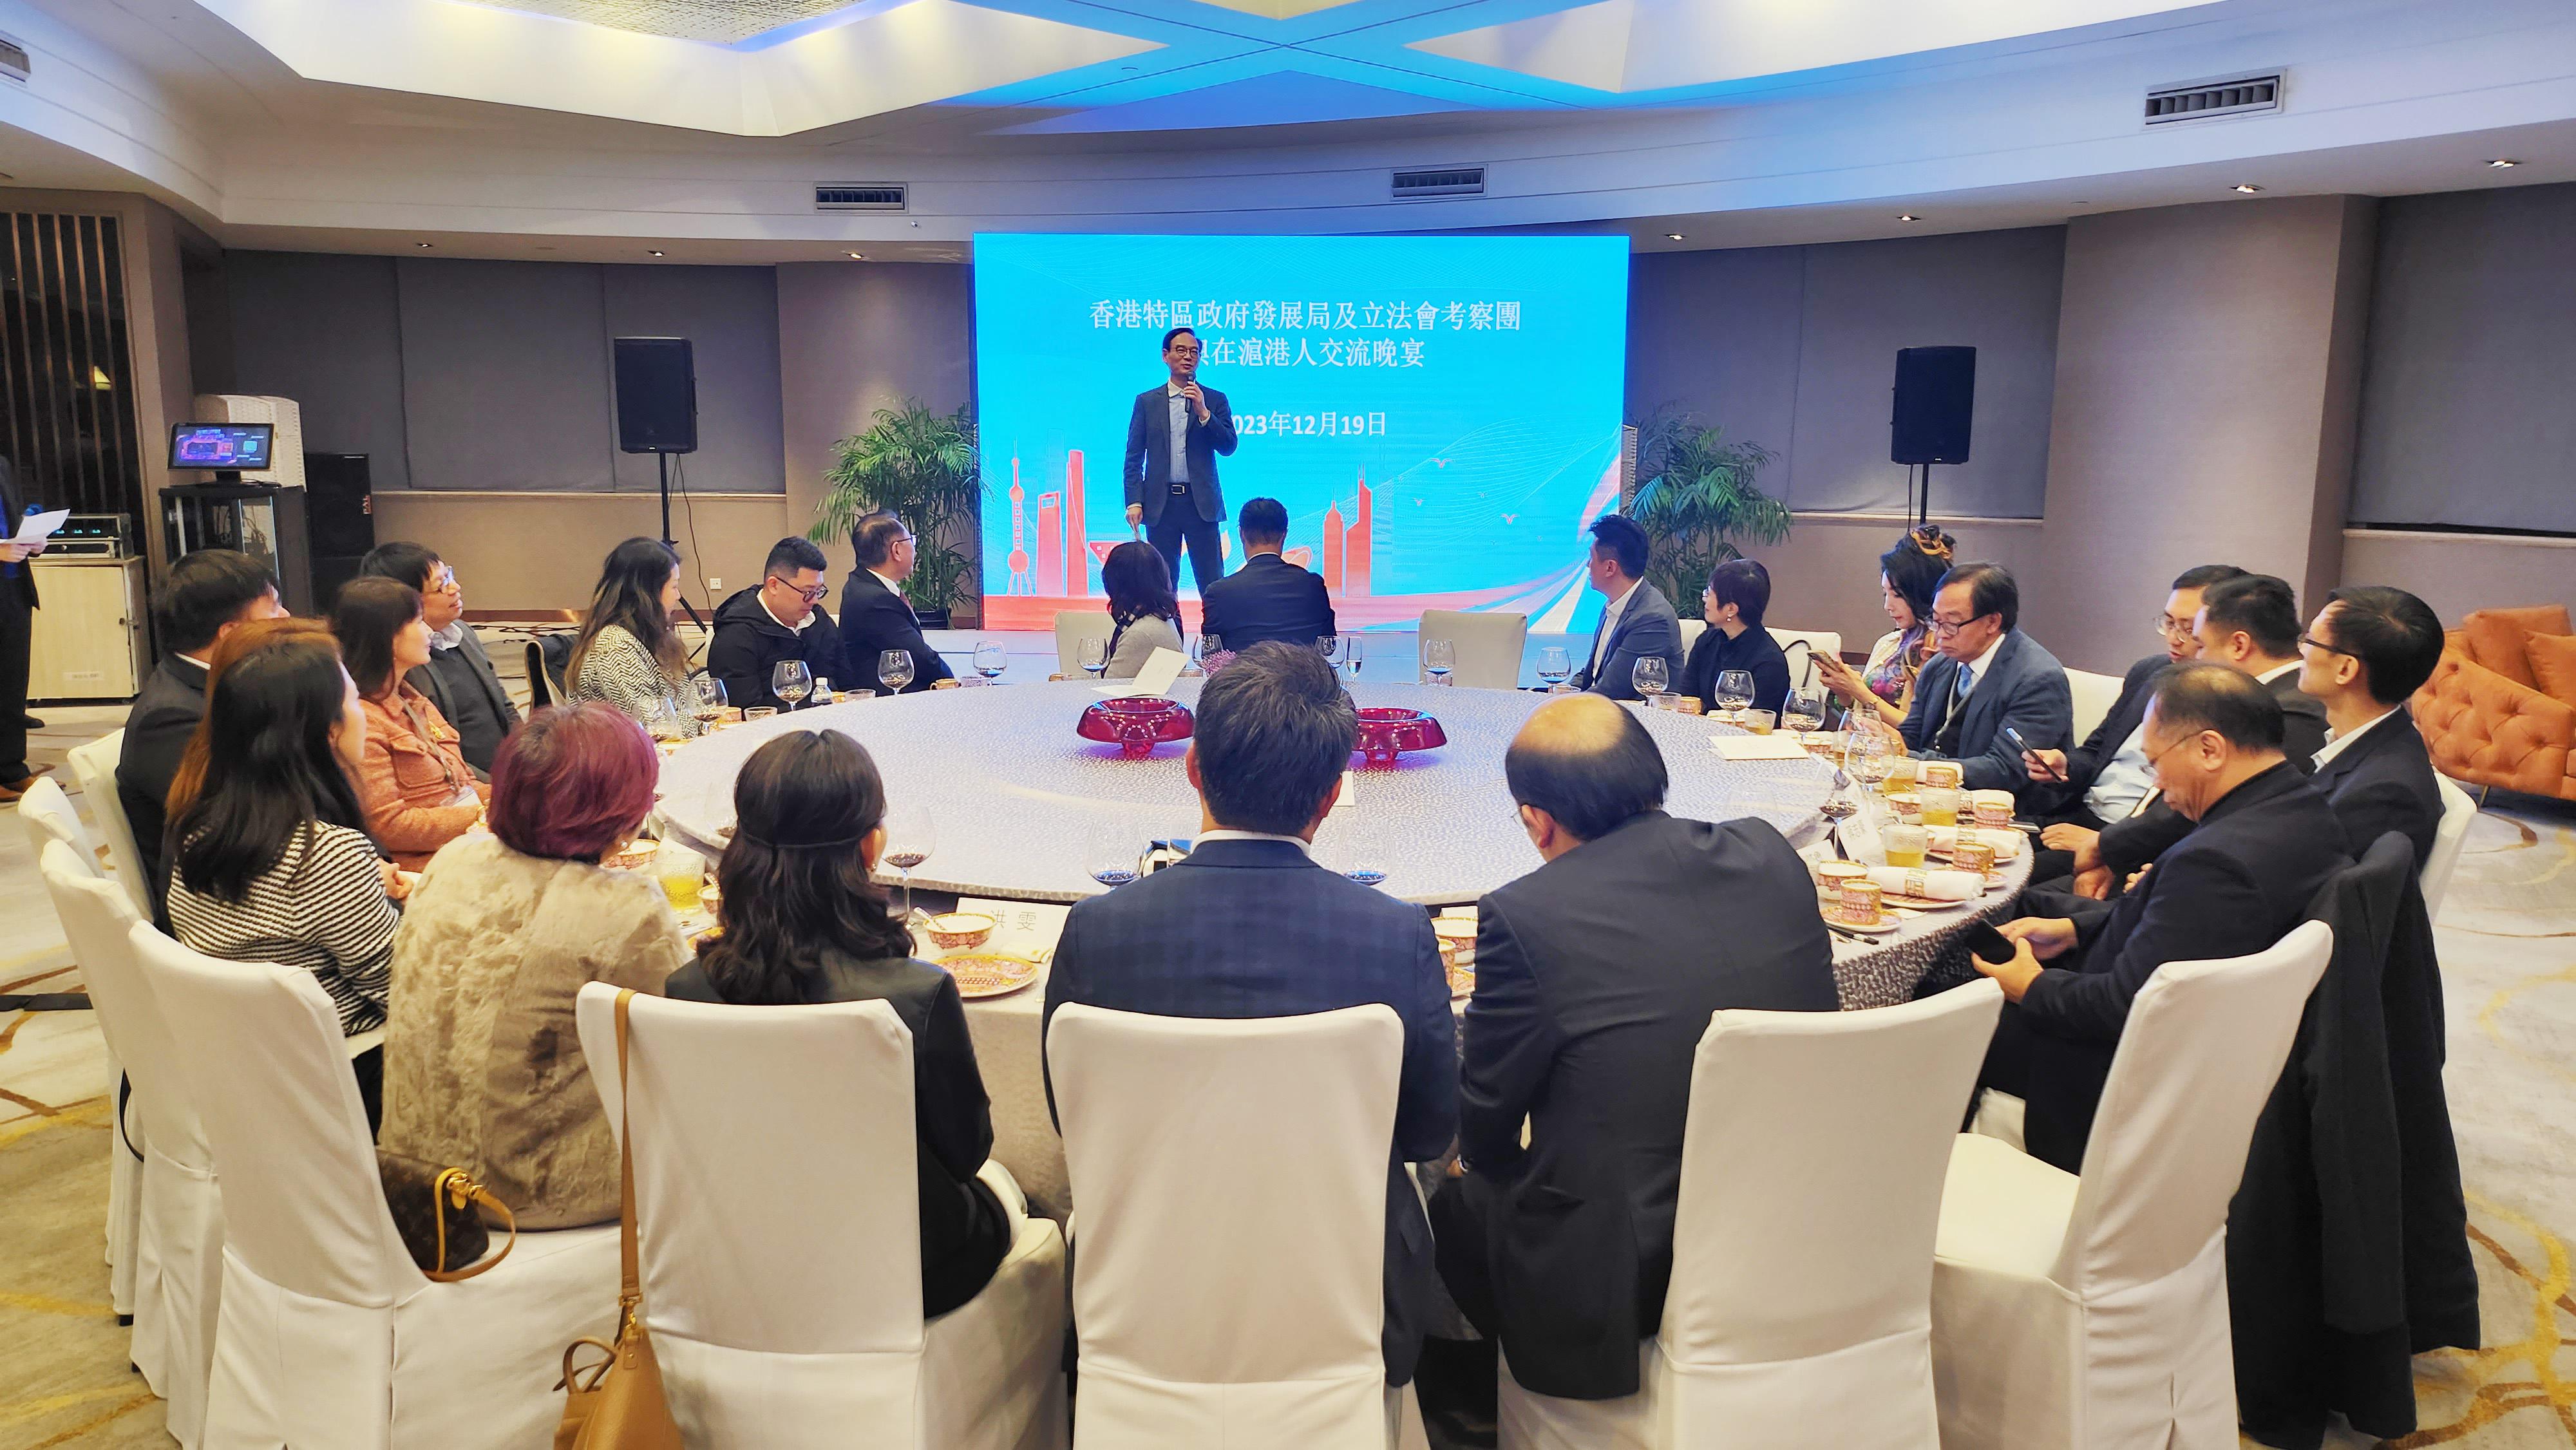 The delegation of the Legislative Council Panel on Development begins the three-day duty visit to Shanghai today (December 19). Photo shows the delegation exchanging views with the representatives of Hong Kong organisations based in Shanghai.